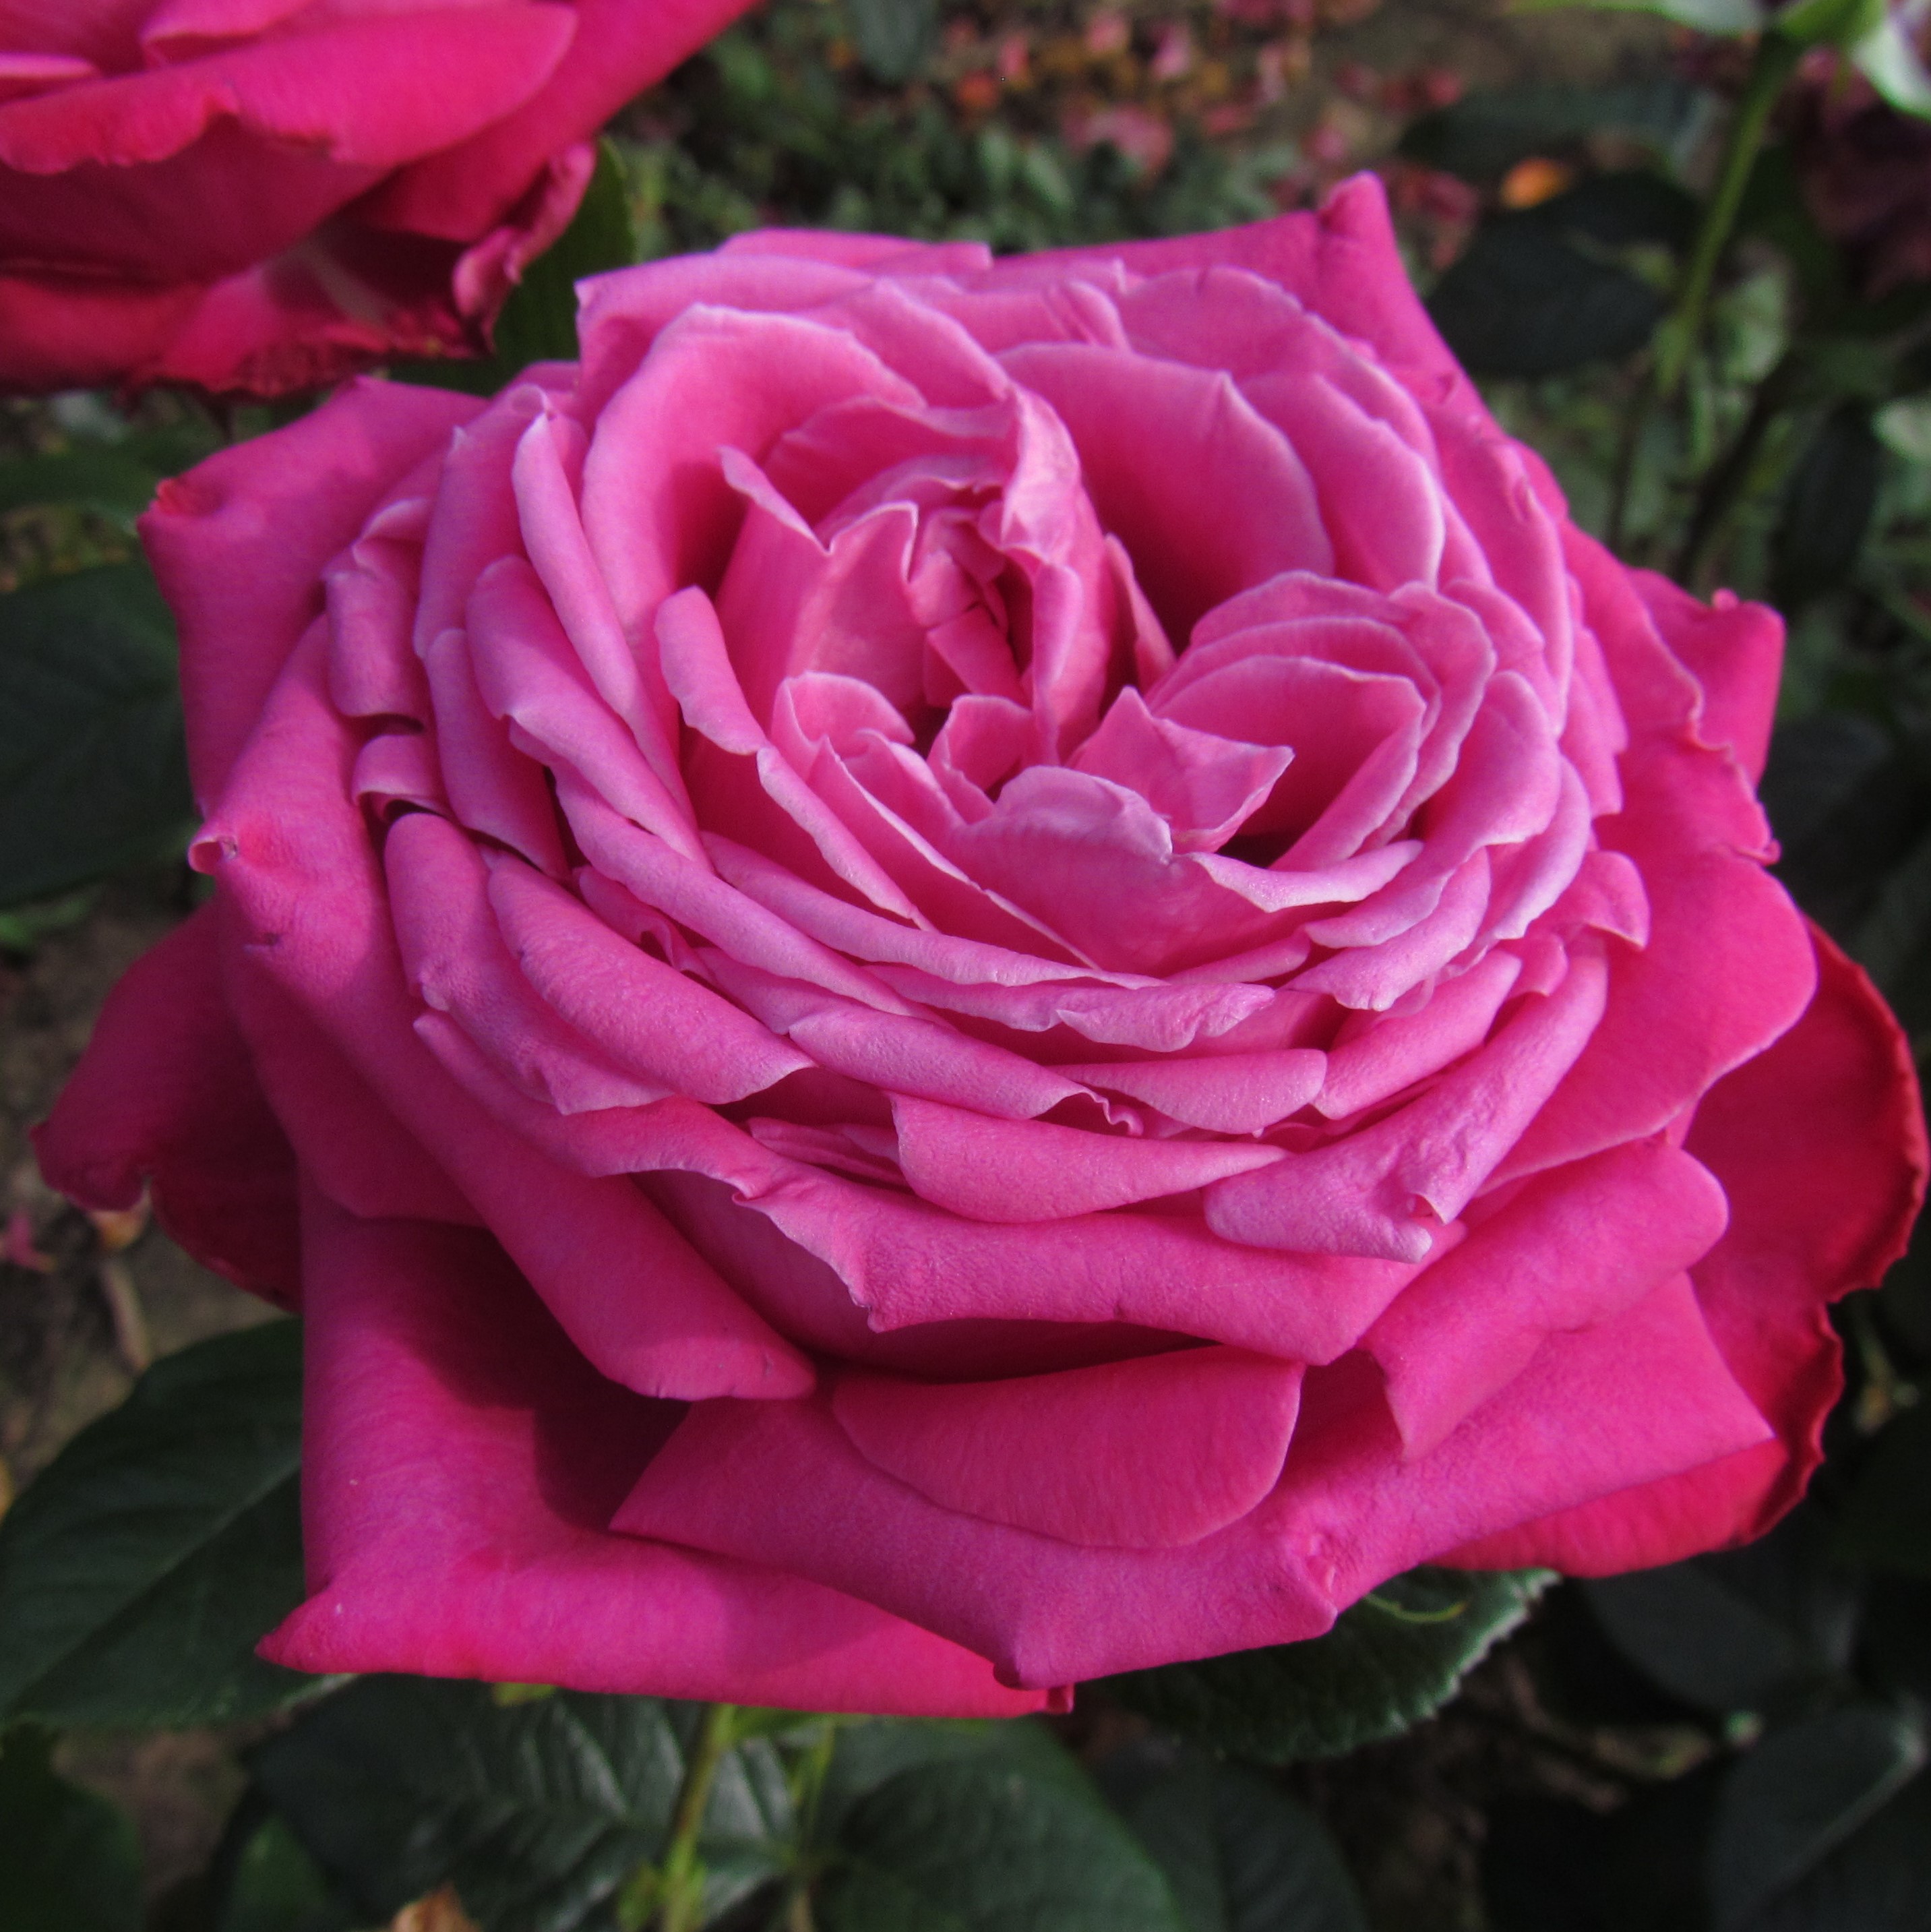 ROSE GEMMA-Superb Plant & Rose Gift To Send For Birthdays & All Gift Occasions